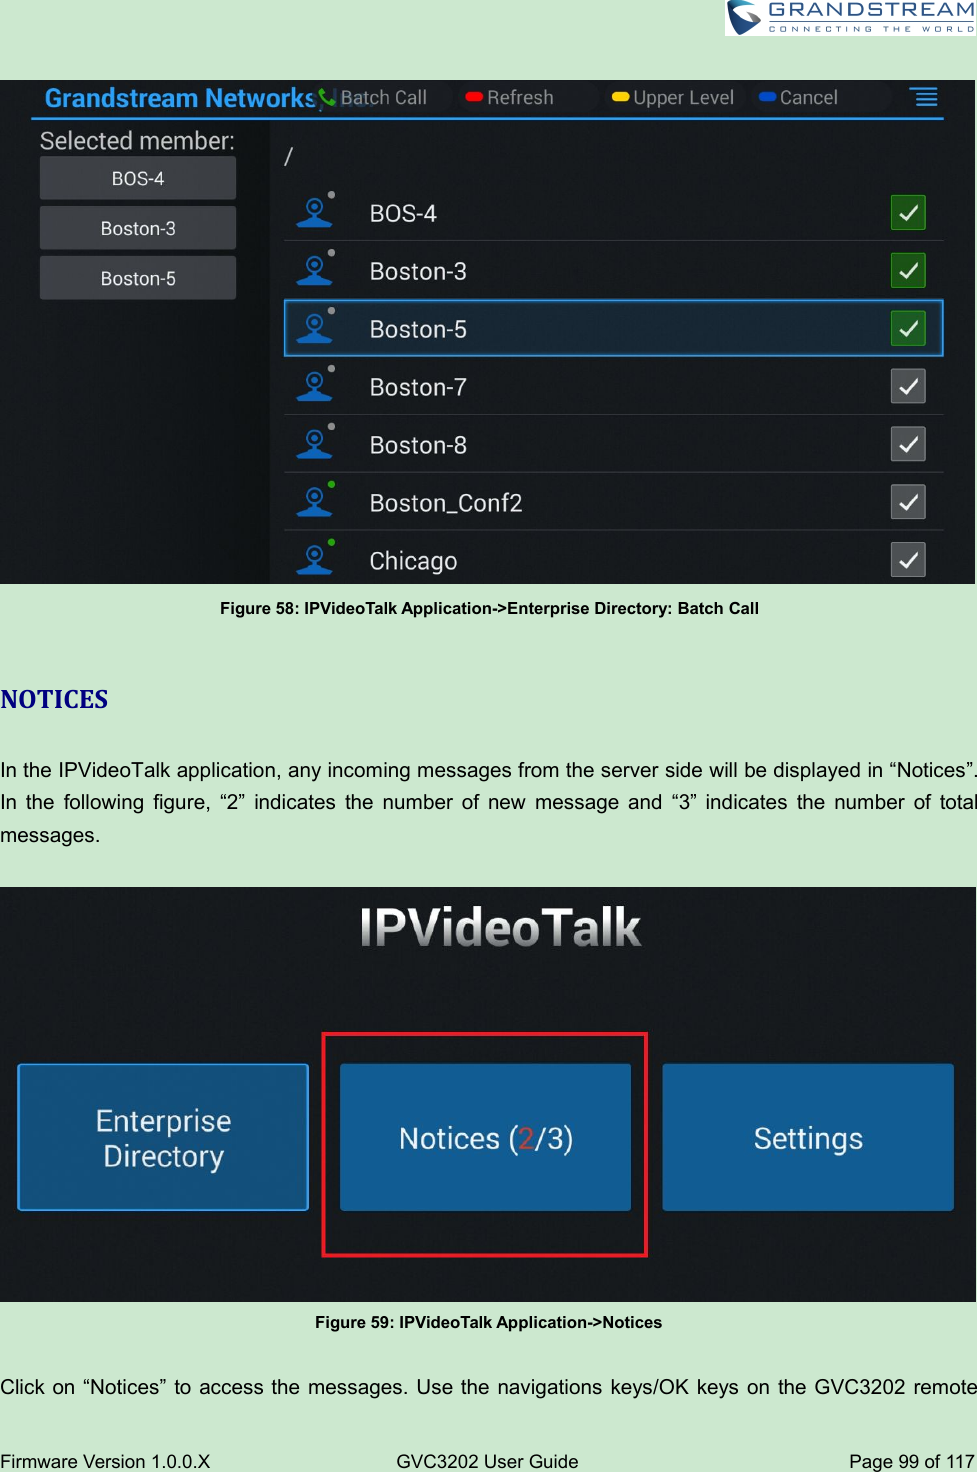 Firmware Version 1.0.0.XGVC3202 User GuidePage 99 of 117Figure 58: IPVideoTalk Application-&gt;Enterprise Directory: Batch CallNOTICESIn the IPVideoTalk application, any incoming messages from the server side will be displayed in “Notices”.In the following figure, “2” indicates the number of new message and “3” indicates the number of totalmessages.Figure 59: IPVideoTalk Application-&gt;NoticesClick on “Notices” to access the messages. Use the navigations keys/OK keys on the GVC3202 remote